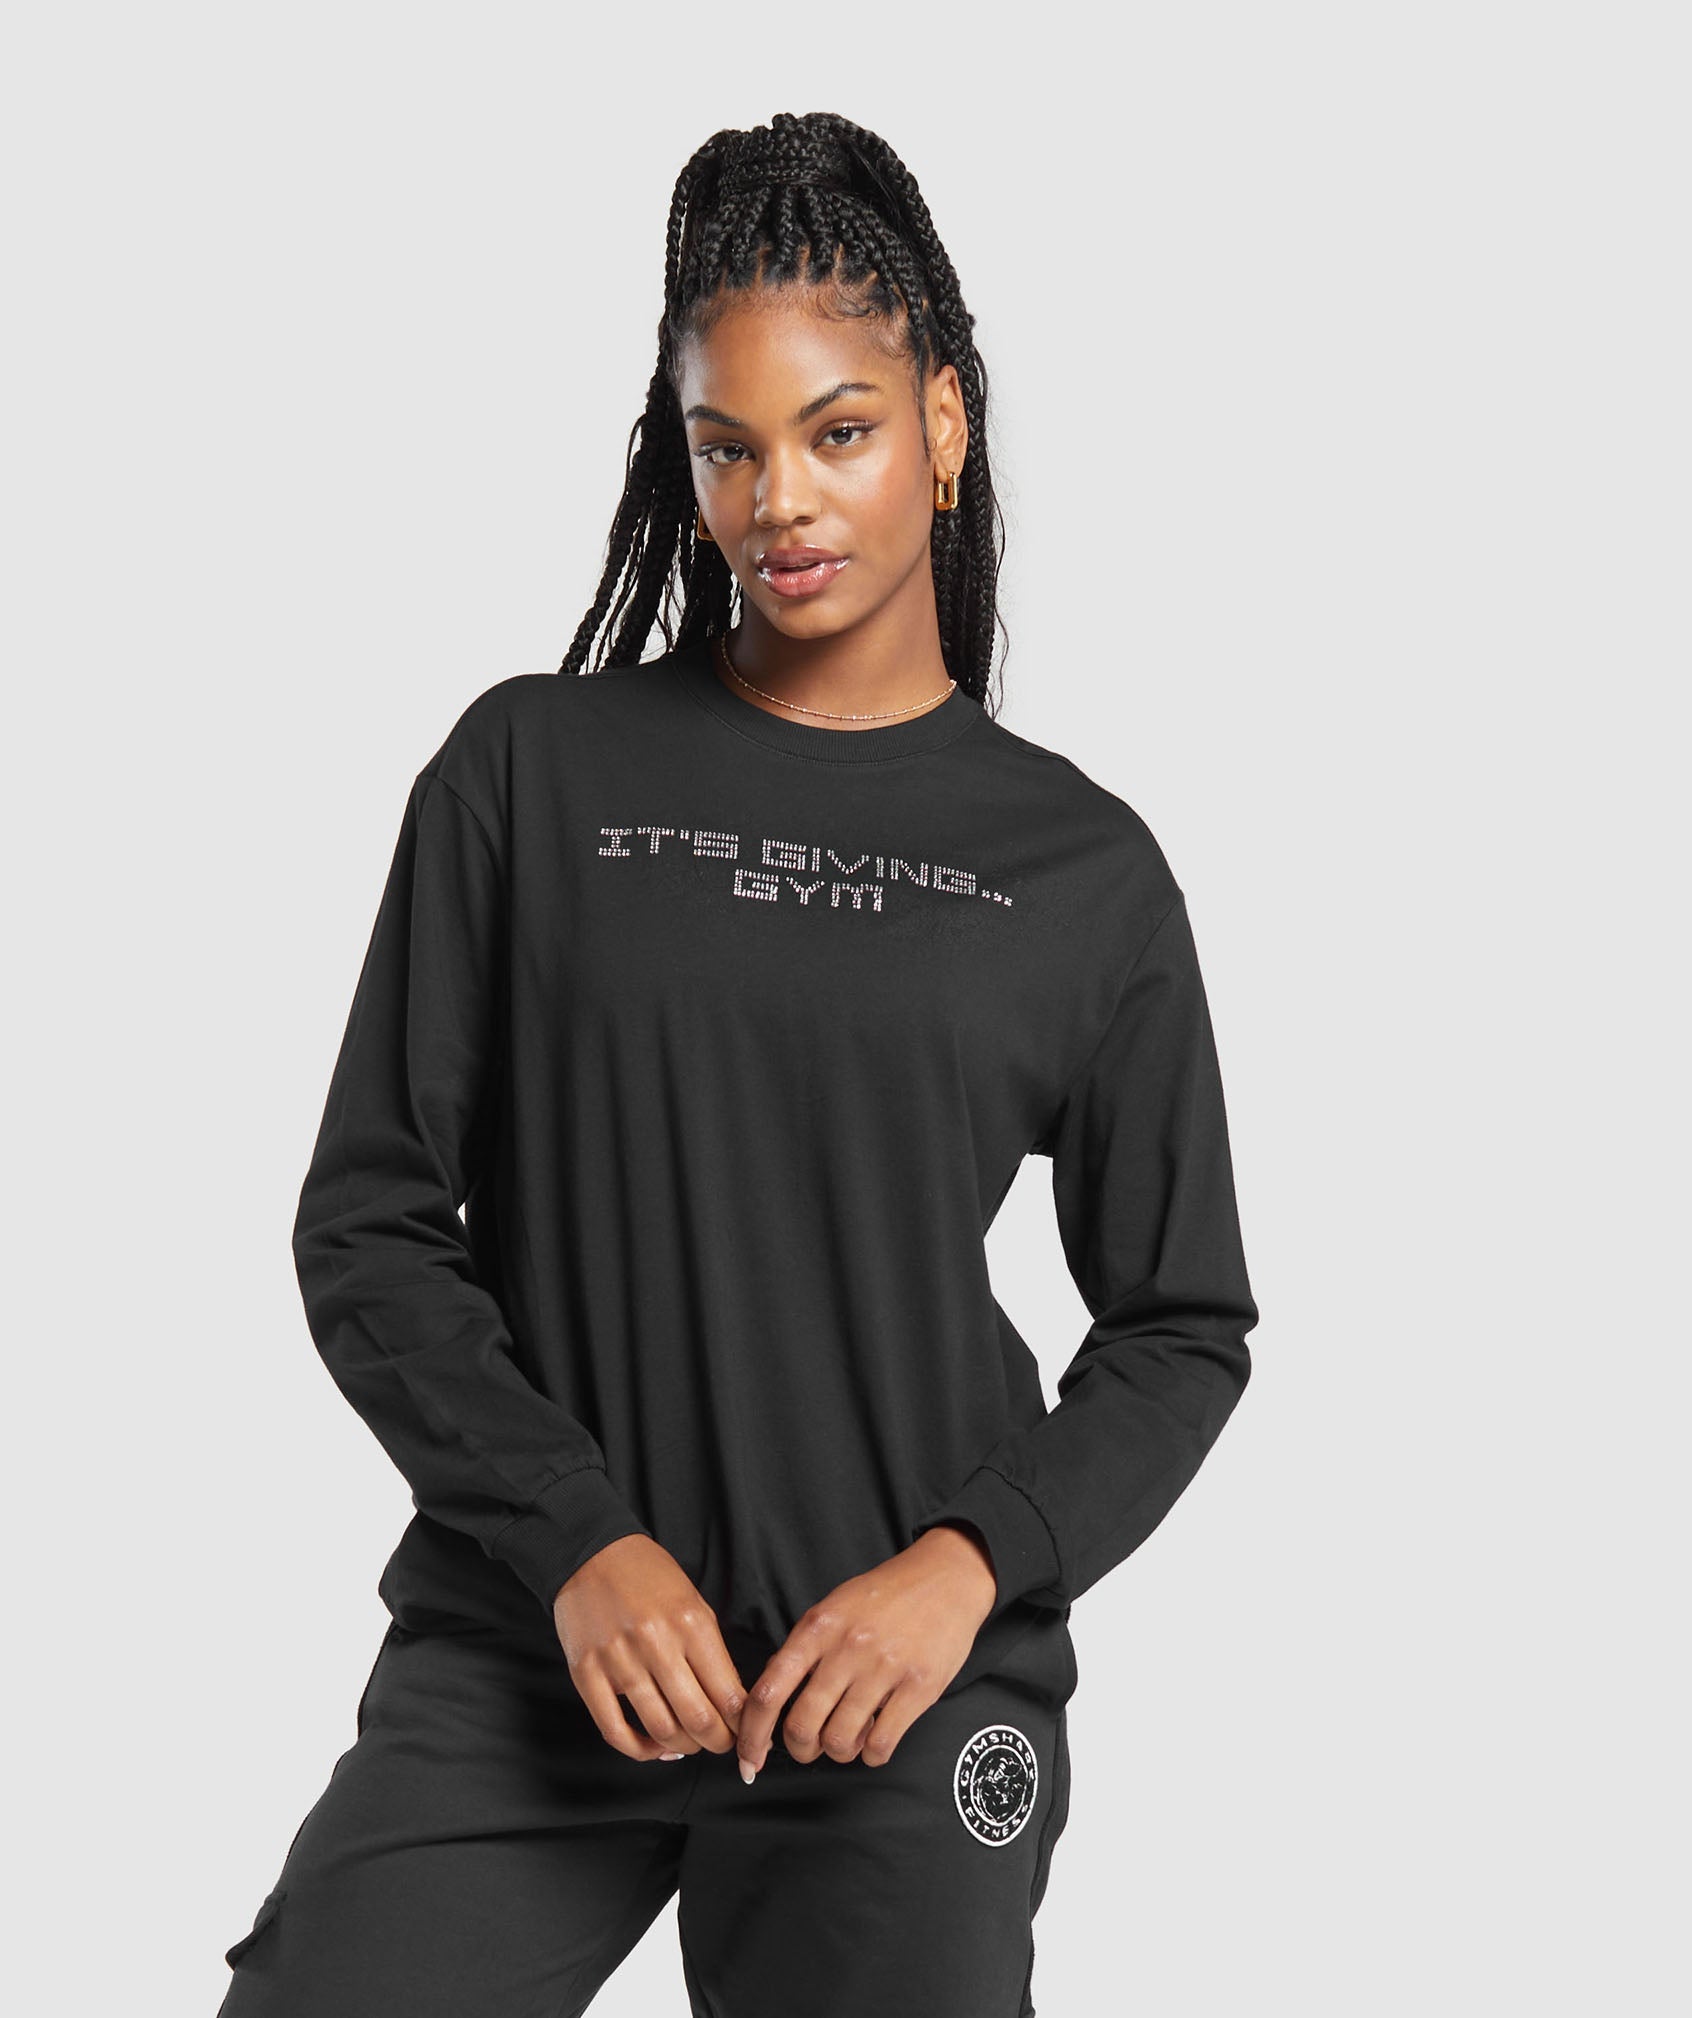  THE GYM PEOPLE Women's Long Sleeve Workout Shirts